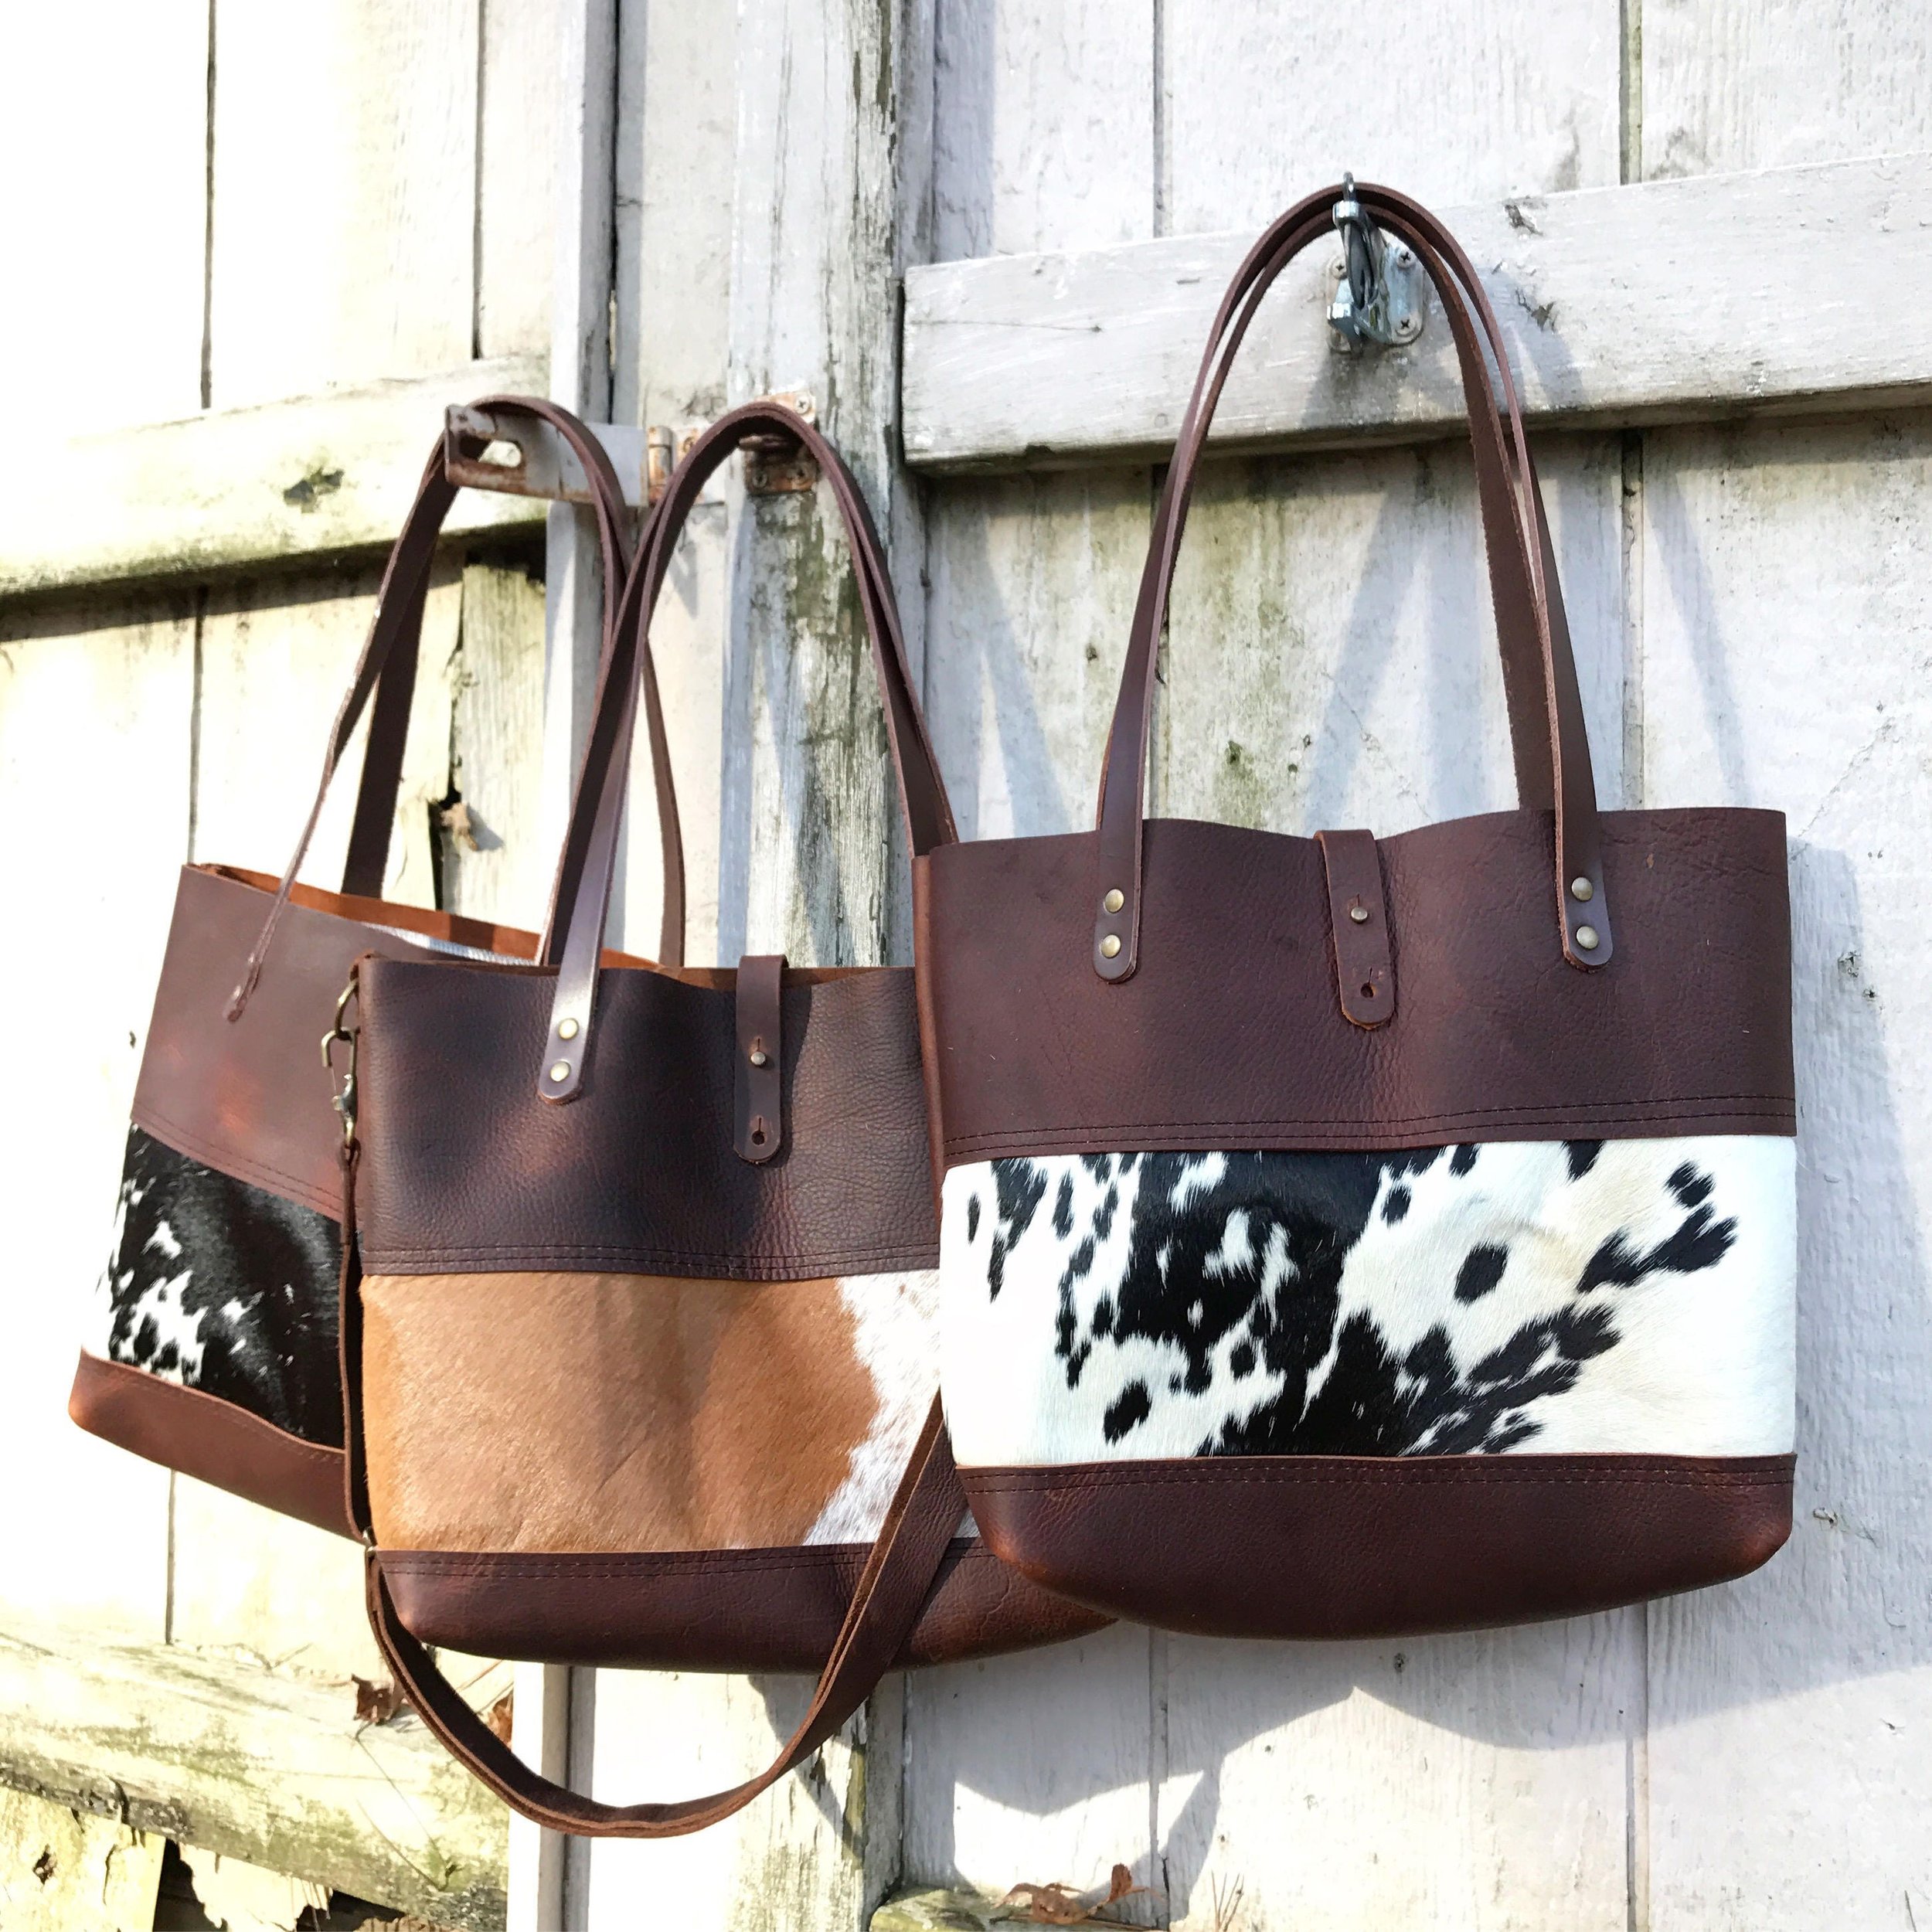 Leather and Cowhide Porter Tote brown leather tote, brown leather bag